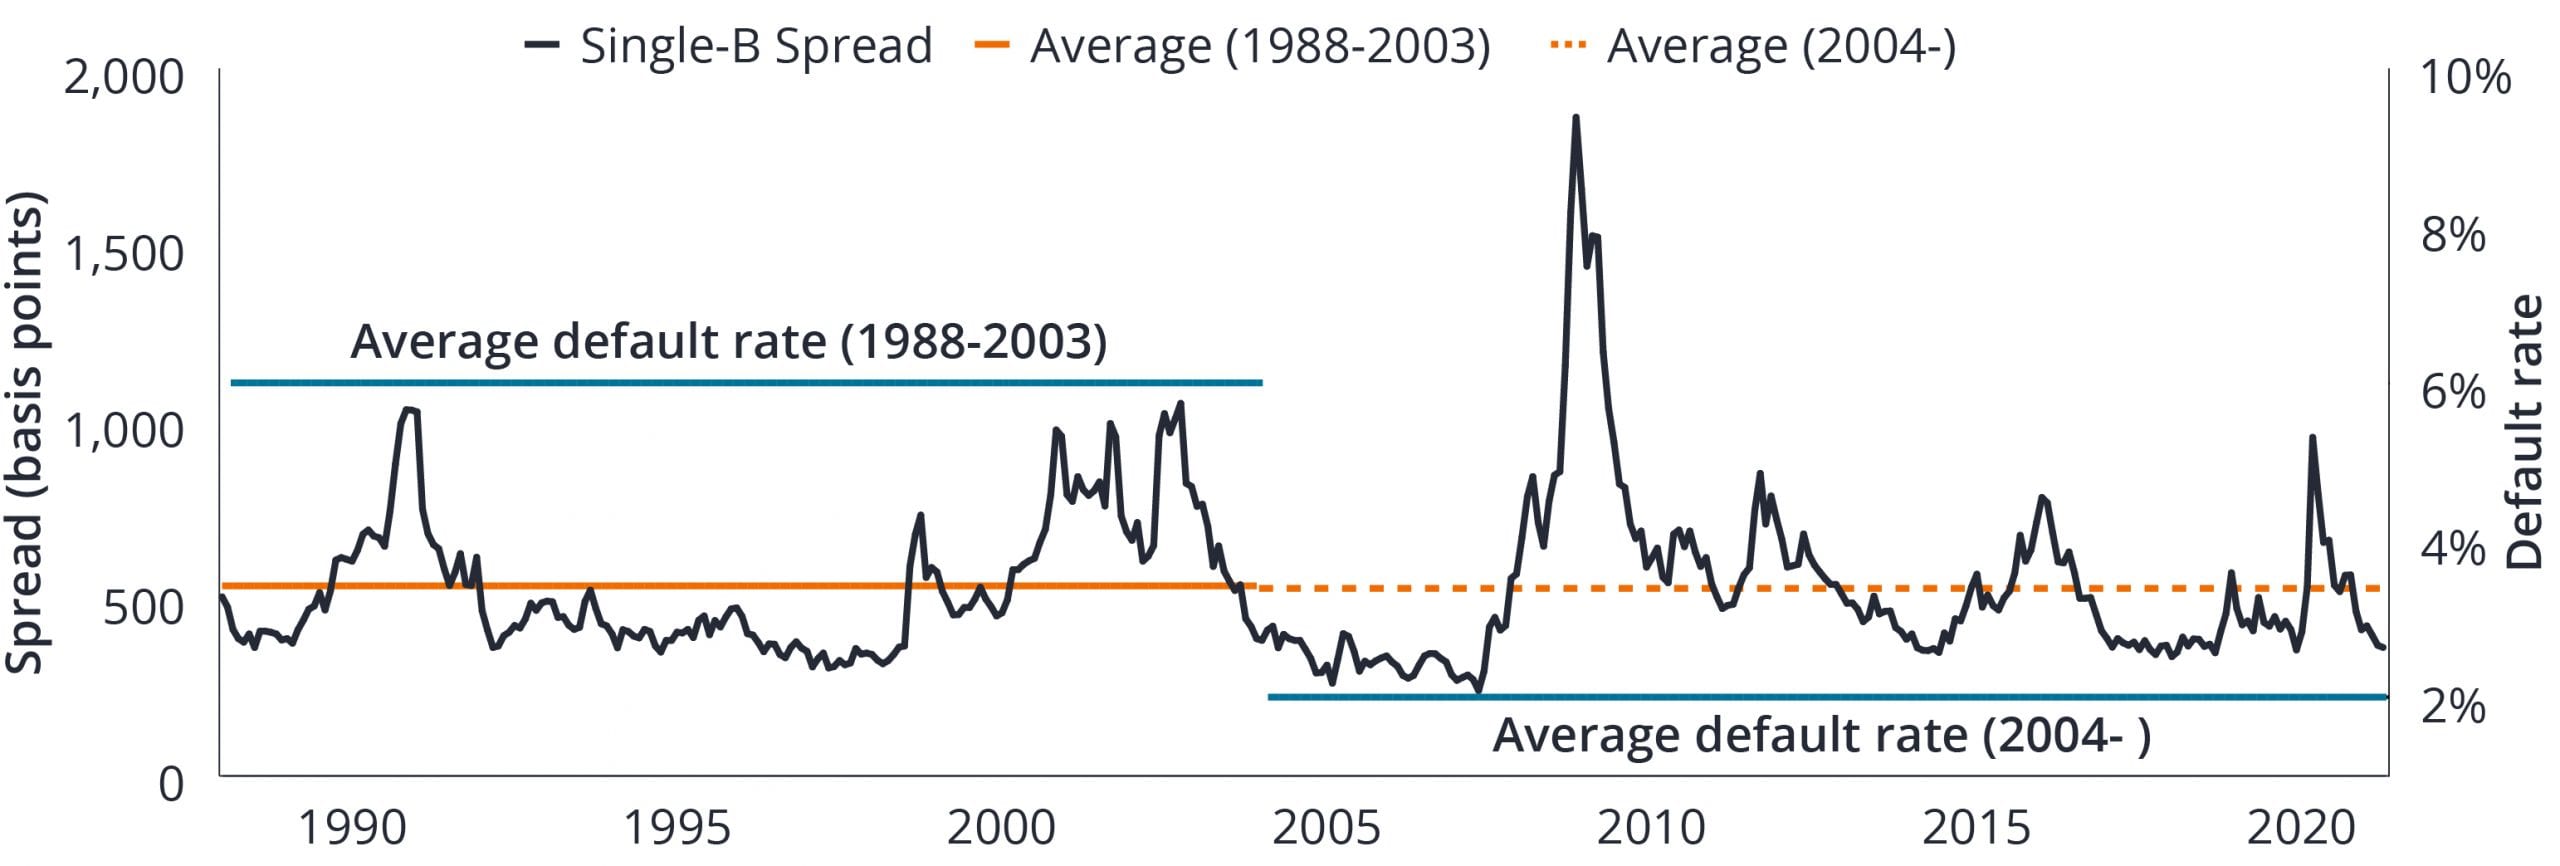 USD Single B average spreads (bps) and average default rates